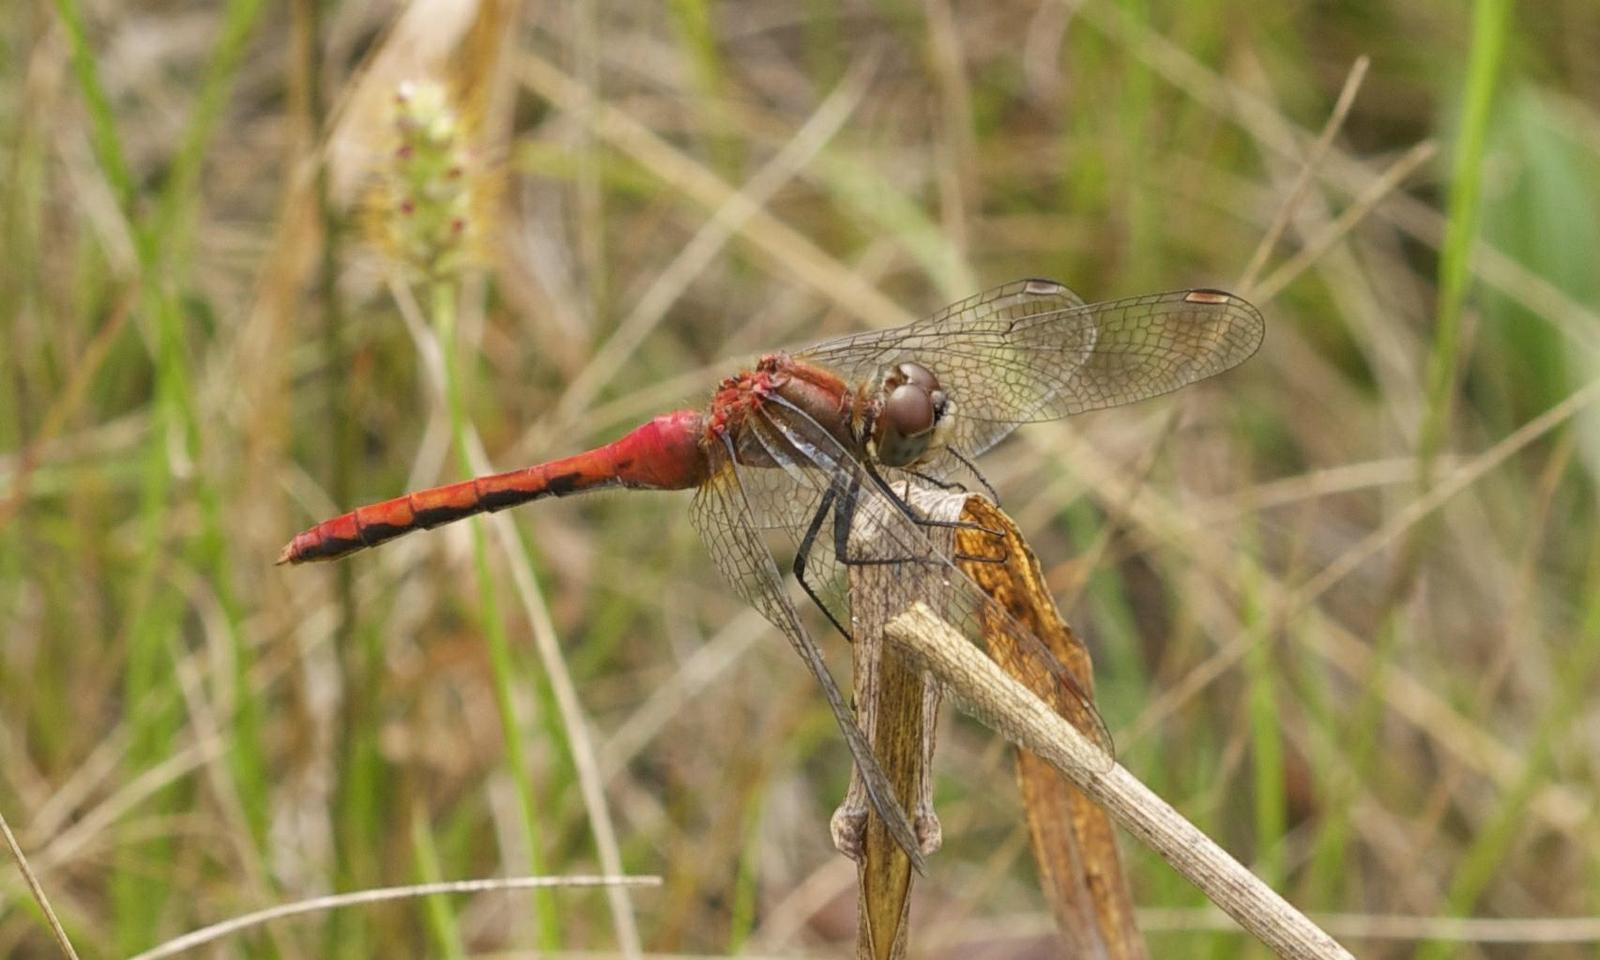 White-faced Meadowhawk Photo by Scott King